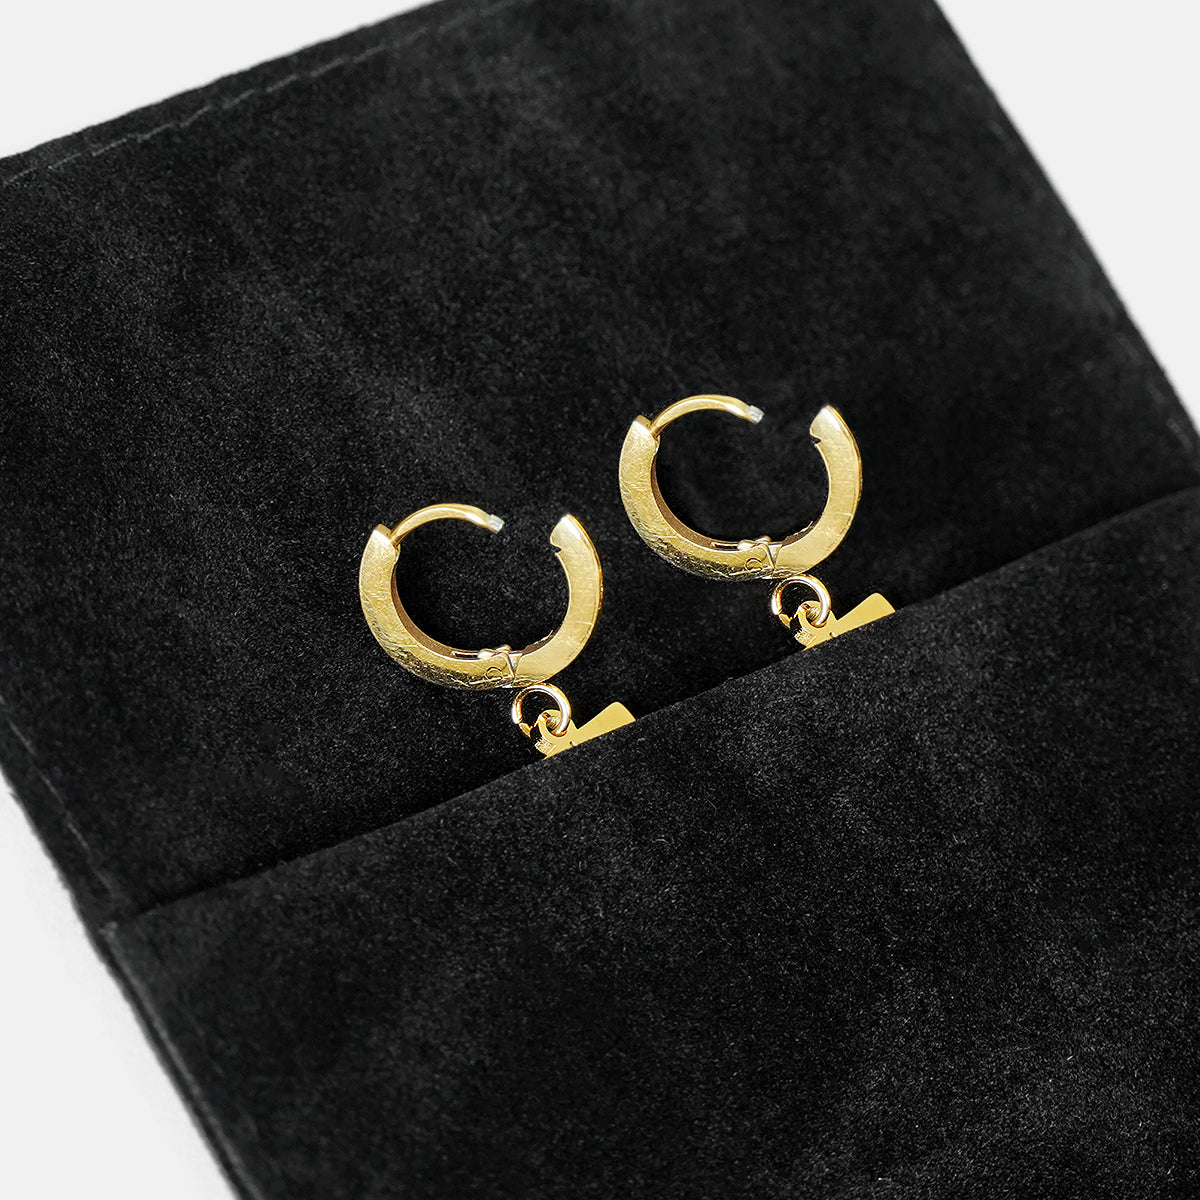 42 Number Earring - Gold Plated Stainless Steel